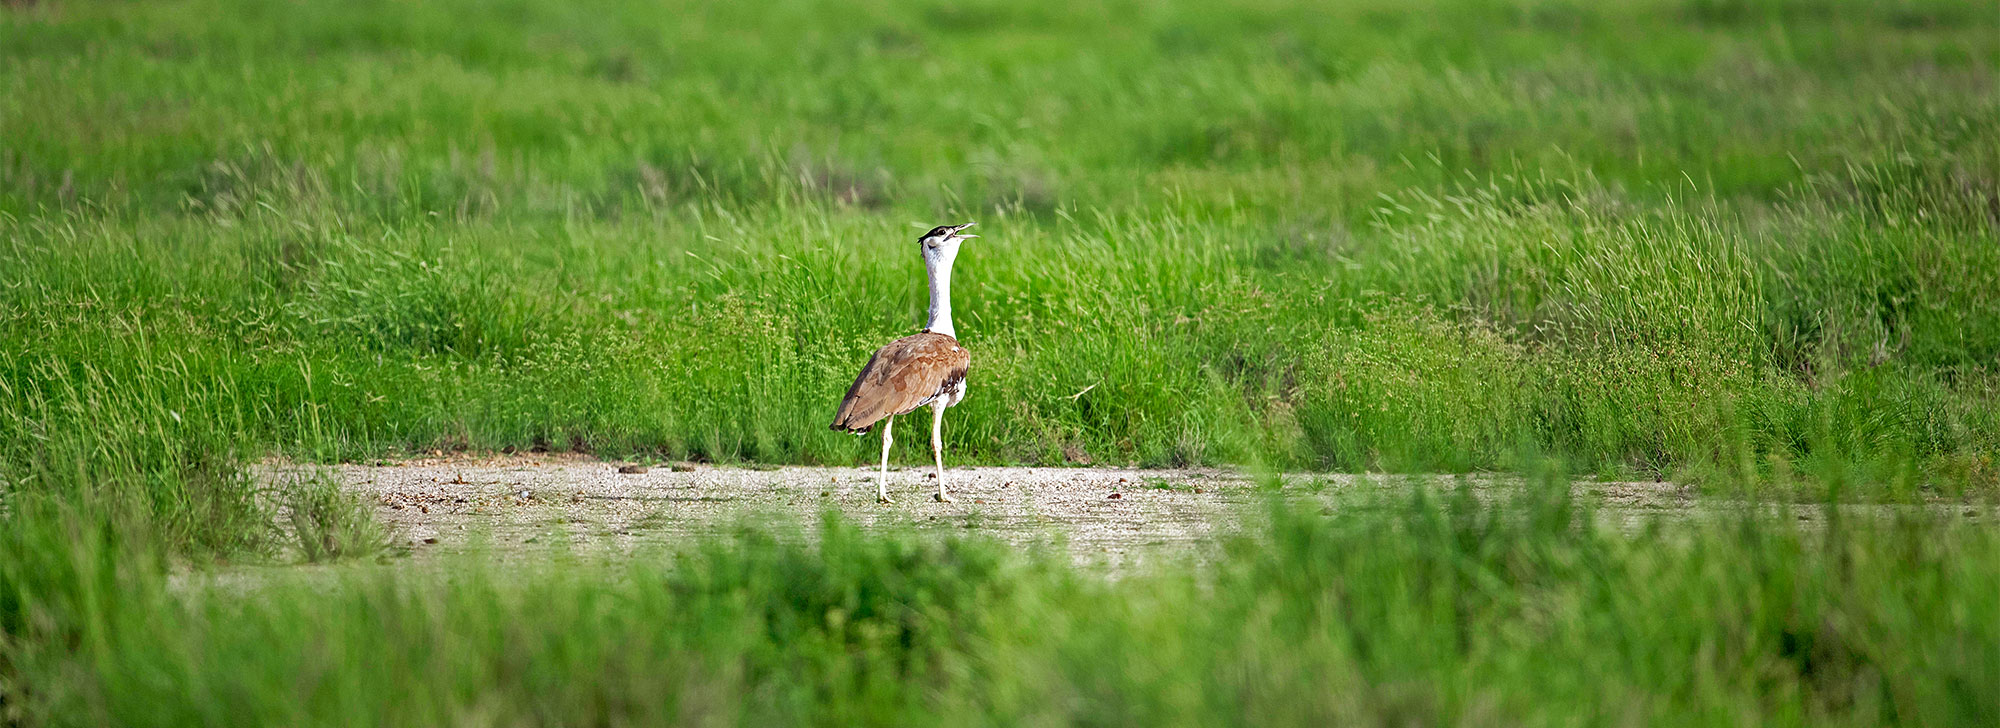 The Great Indian Bustard Sanctuary